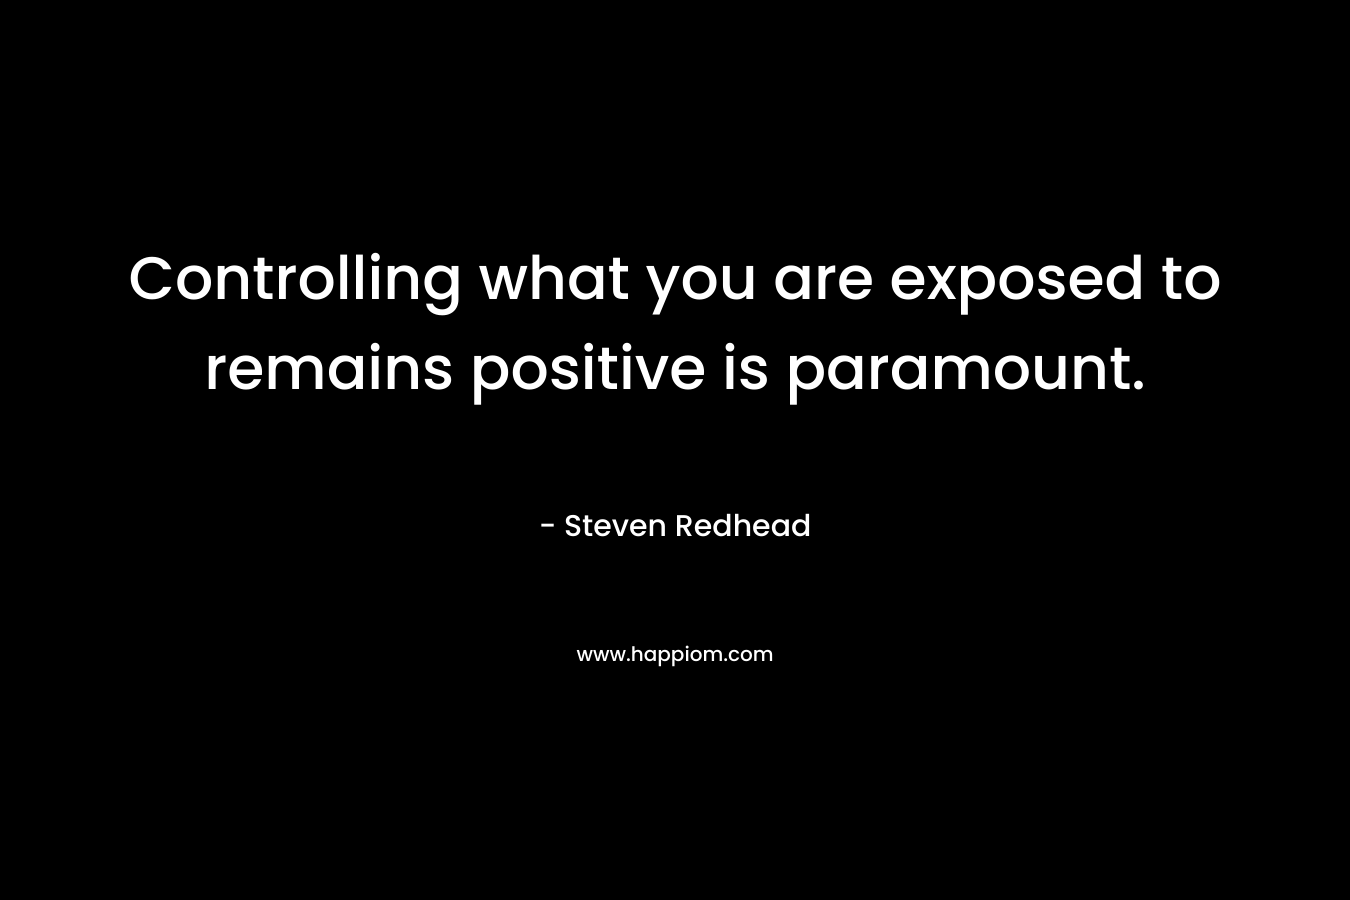 Controlling what you are exposed to remains positive is paramount.